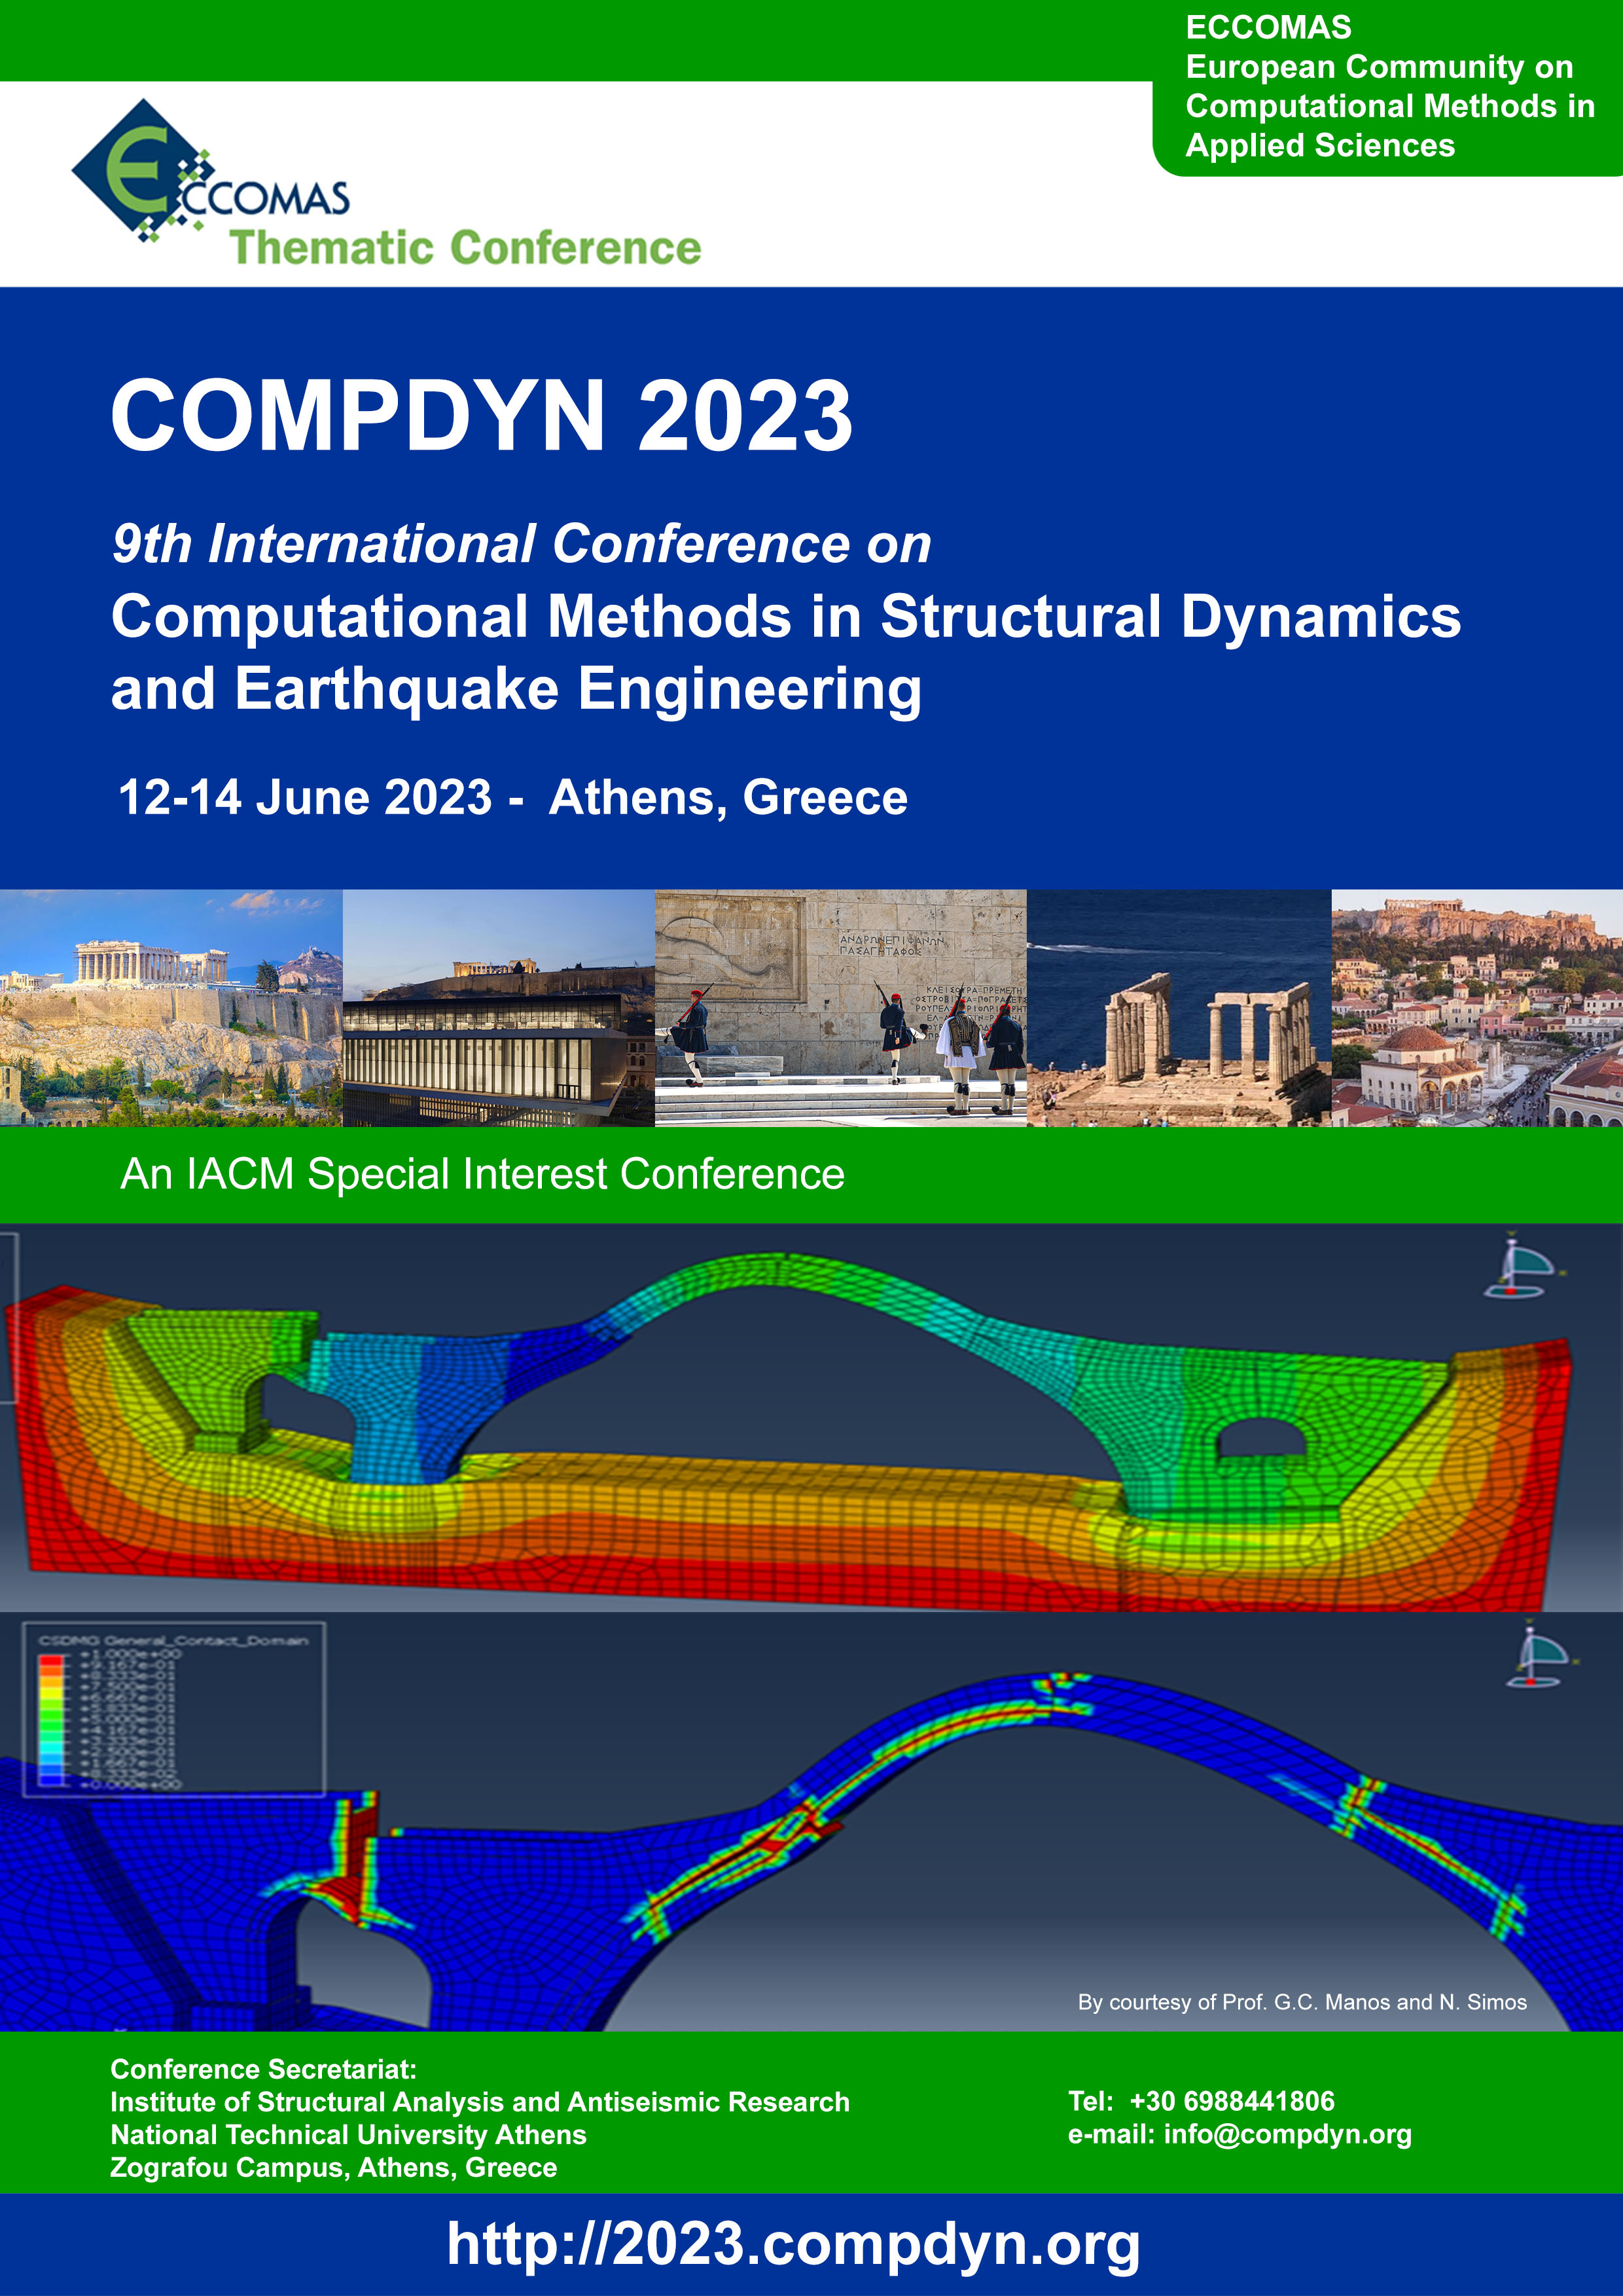 9th International Conference on Computational Methods in Structural Dynamics and Earthquake Engineering (COMPDYN 2023)